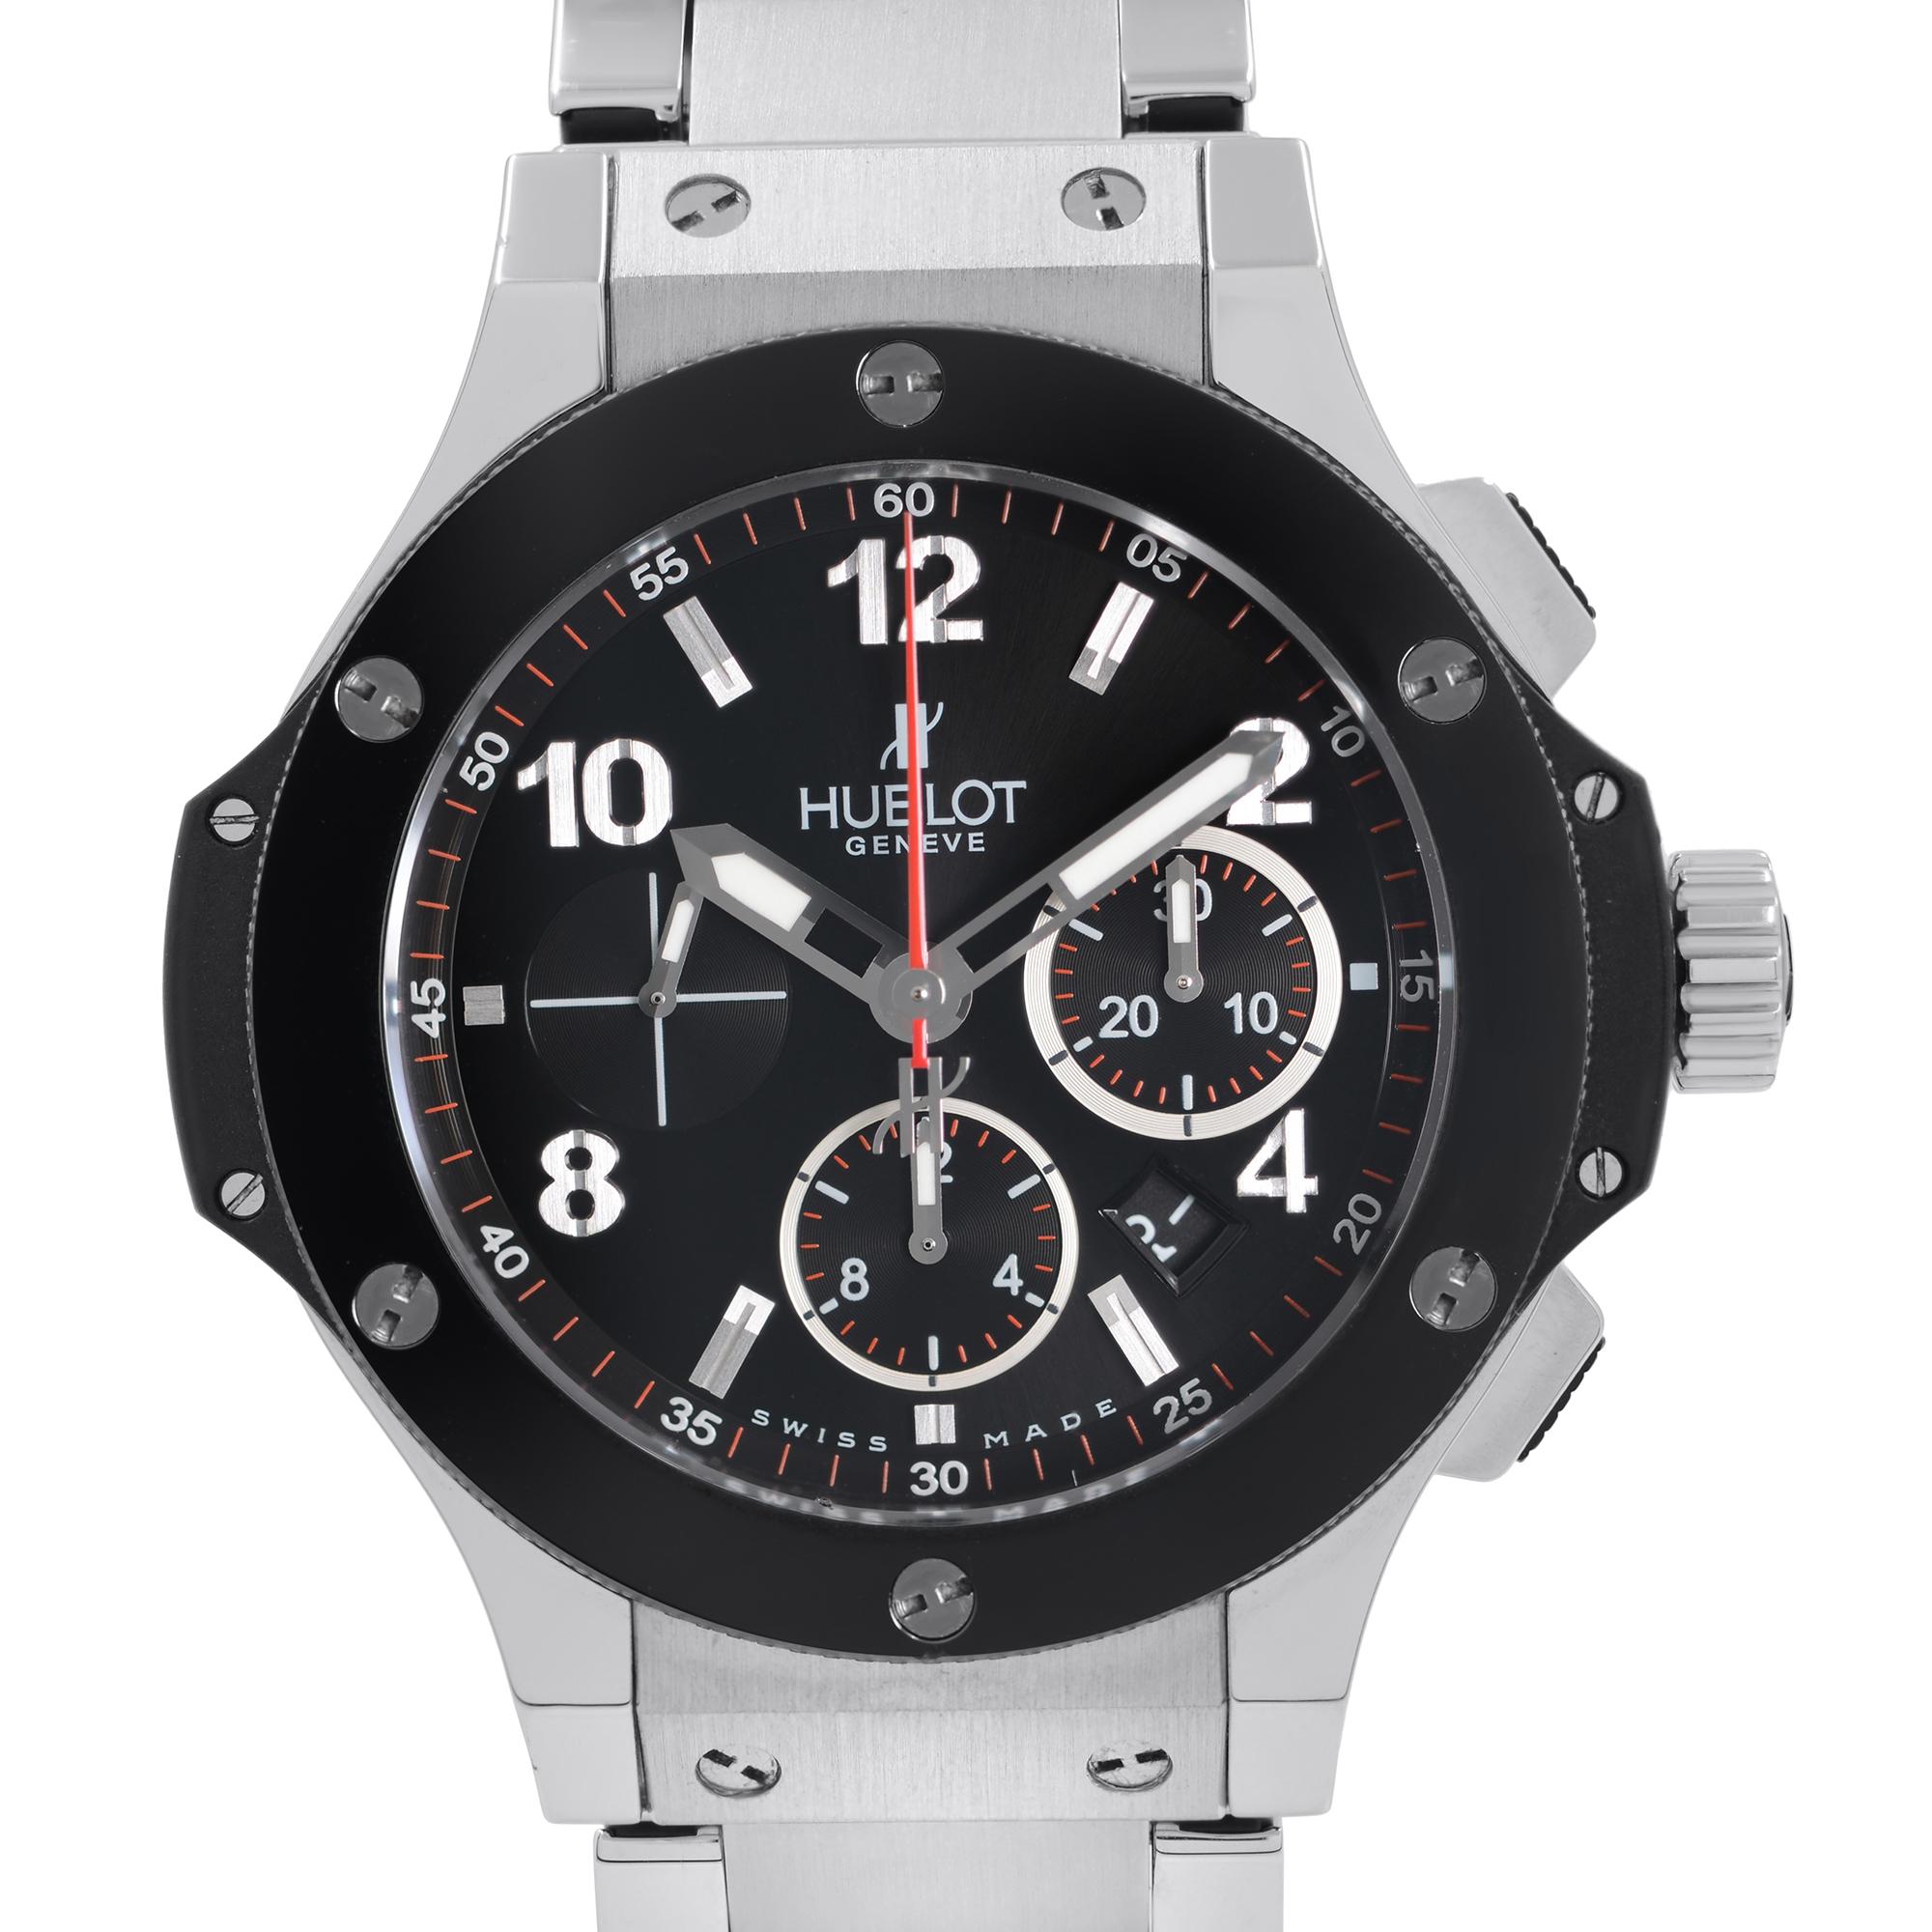 Pre-owned Hublot Big Bang Steel Case Black Chronograph Dial Men's Watch 301.SX.130.SX. This Beautiful Timepiece is Powered by Mechanical (Automatic) Movement And Features: Stainless Steel Case and Bracelet, Fixed Stainless Steel Bezel with 6 Screws,